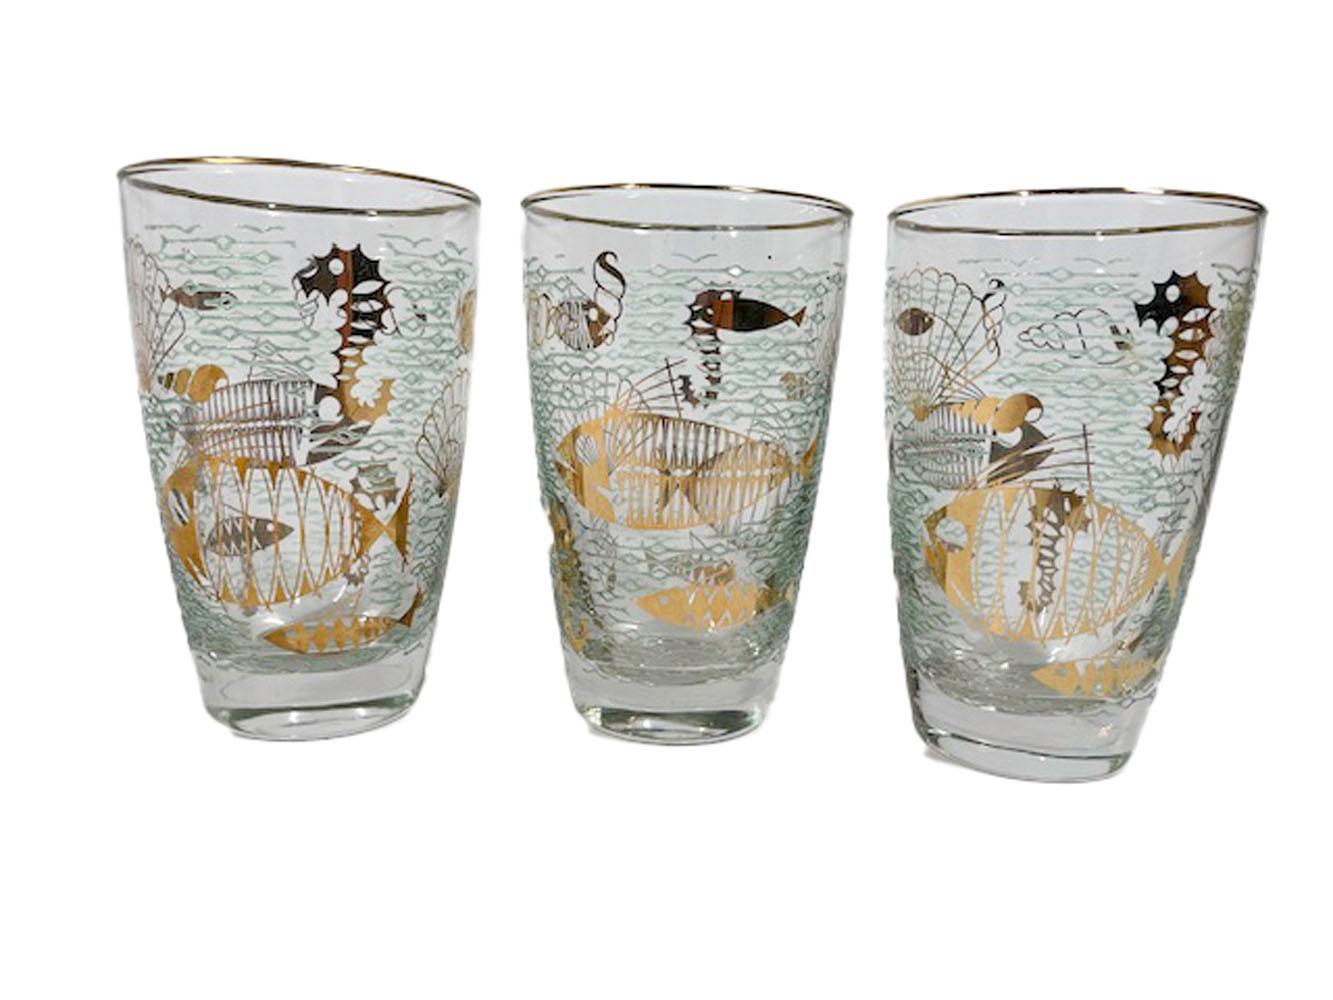 Set of 6 Libbey Glass Tumblers in the Marine Life Pattern, Discontinued in 1959 In Good Condition For Sale In Nantucket, MA